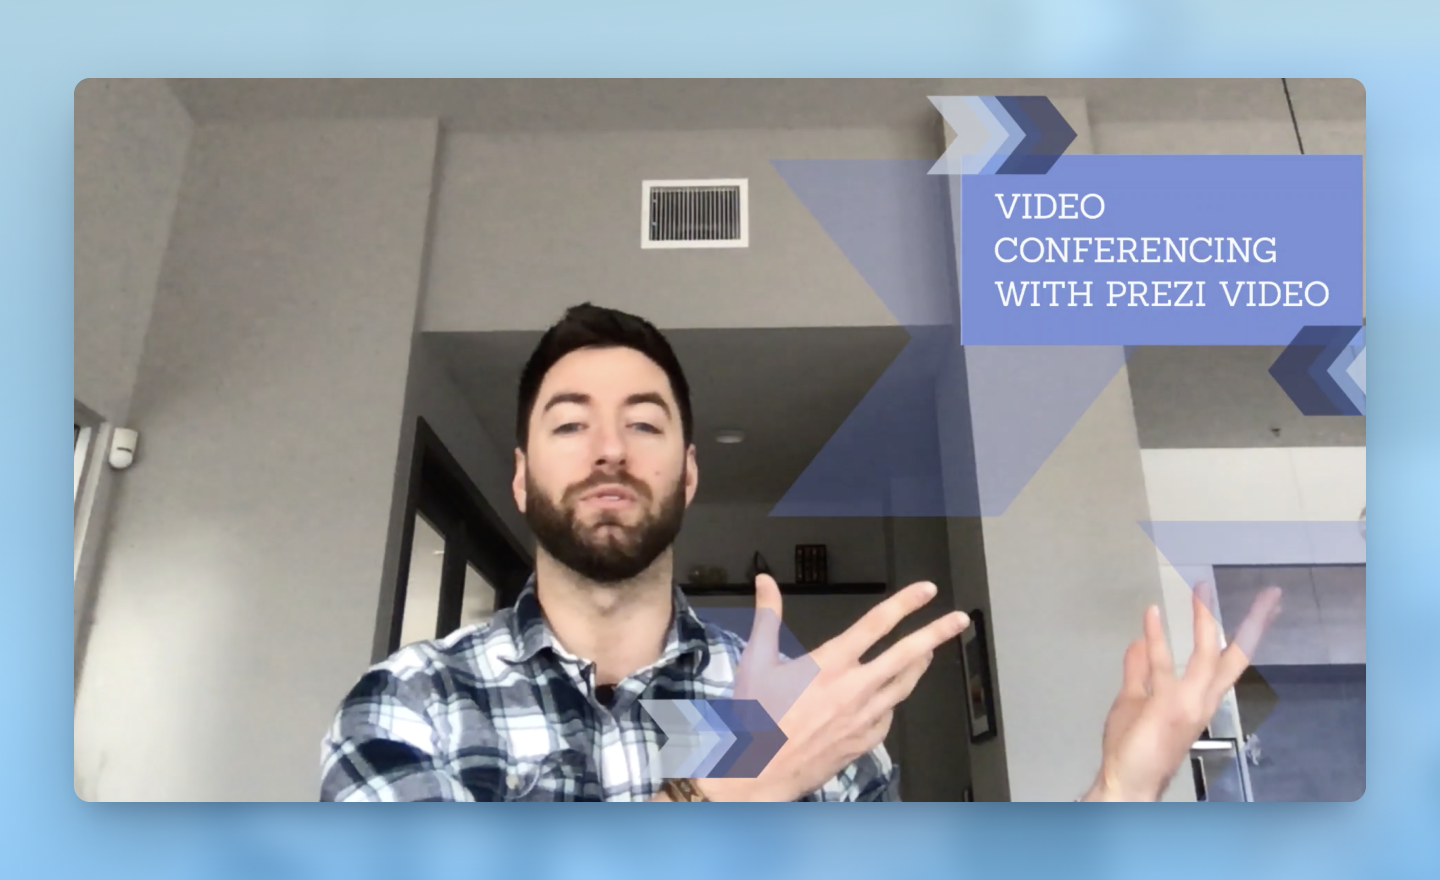 how to use Prezi Video with video conferencing platforms